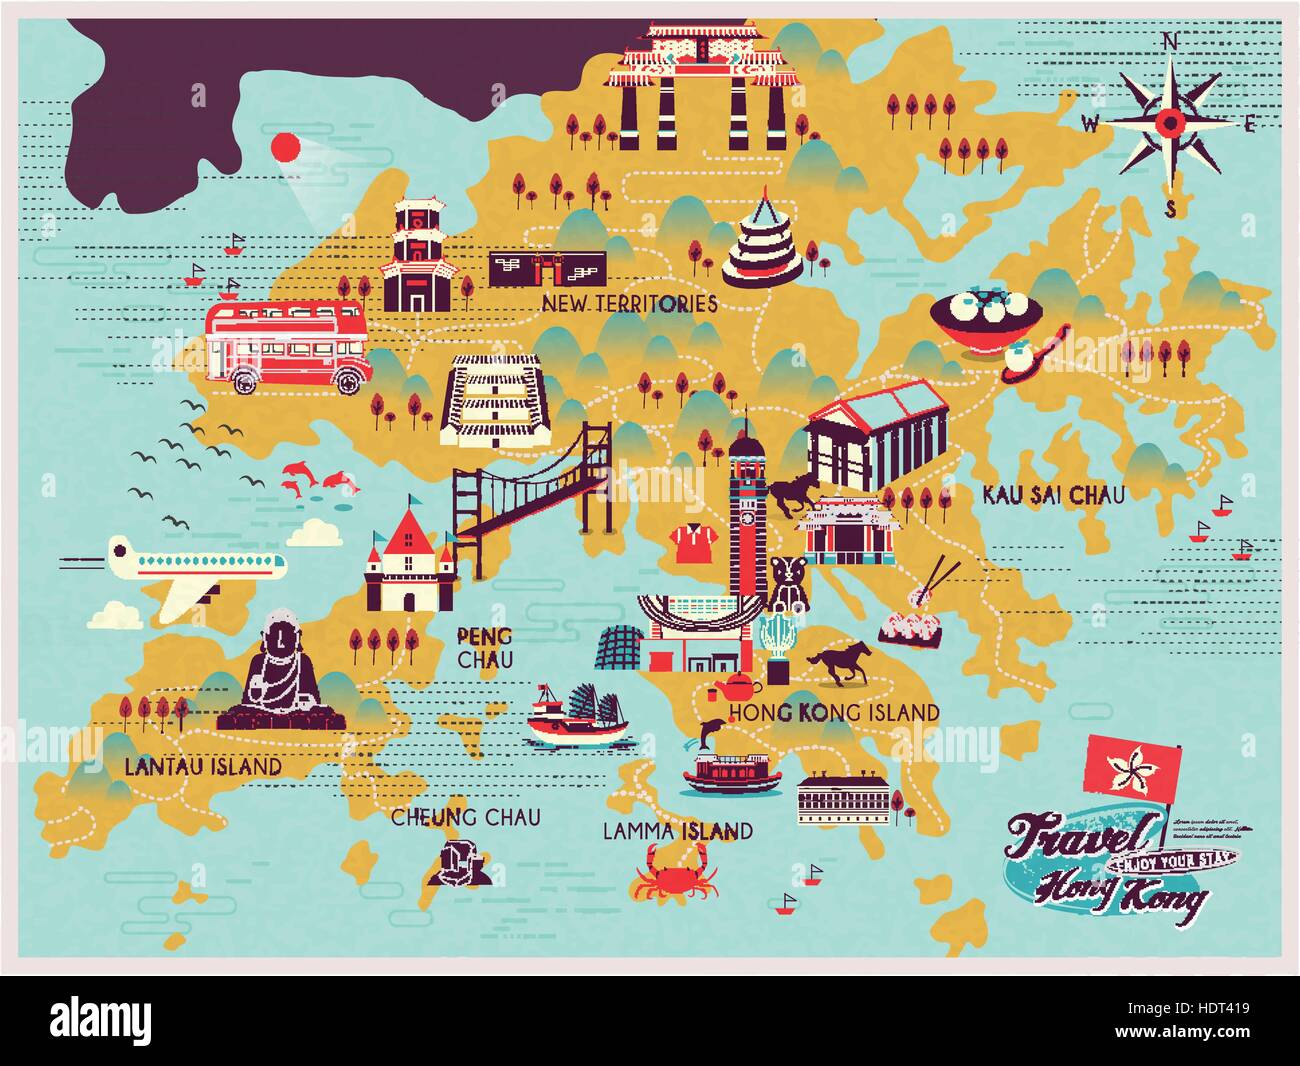 Attractive Hong Kong Travel Map With Attractions Icons In Flat Design